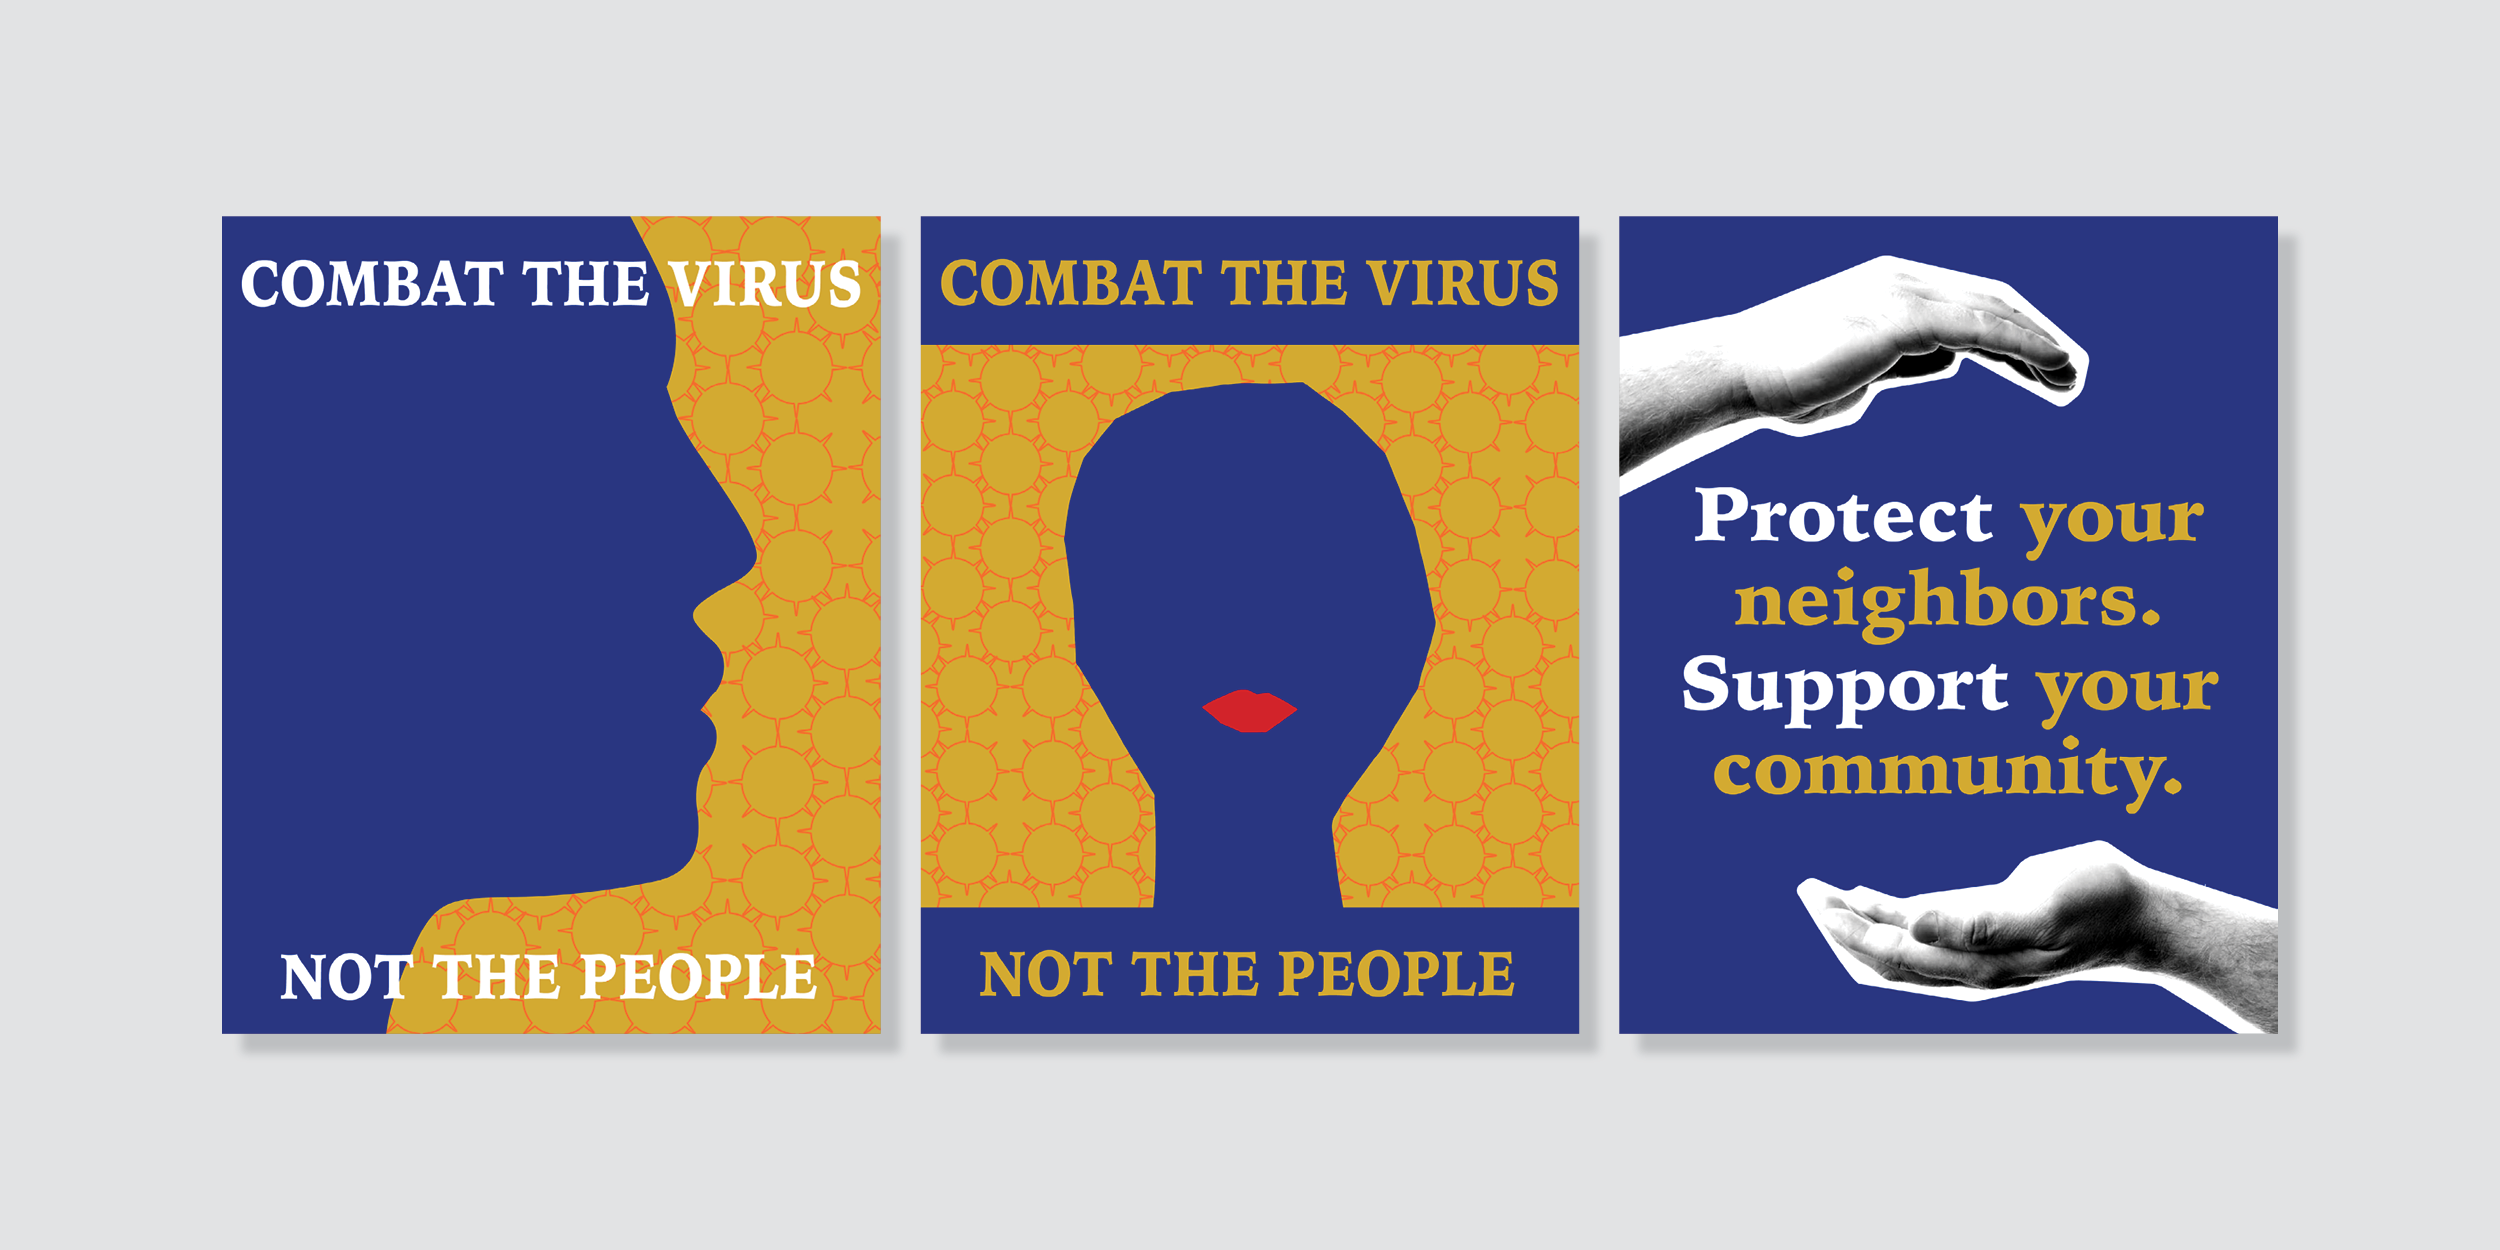 three graphic PSA posters on combating Covid placed side by side